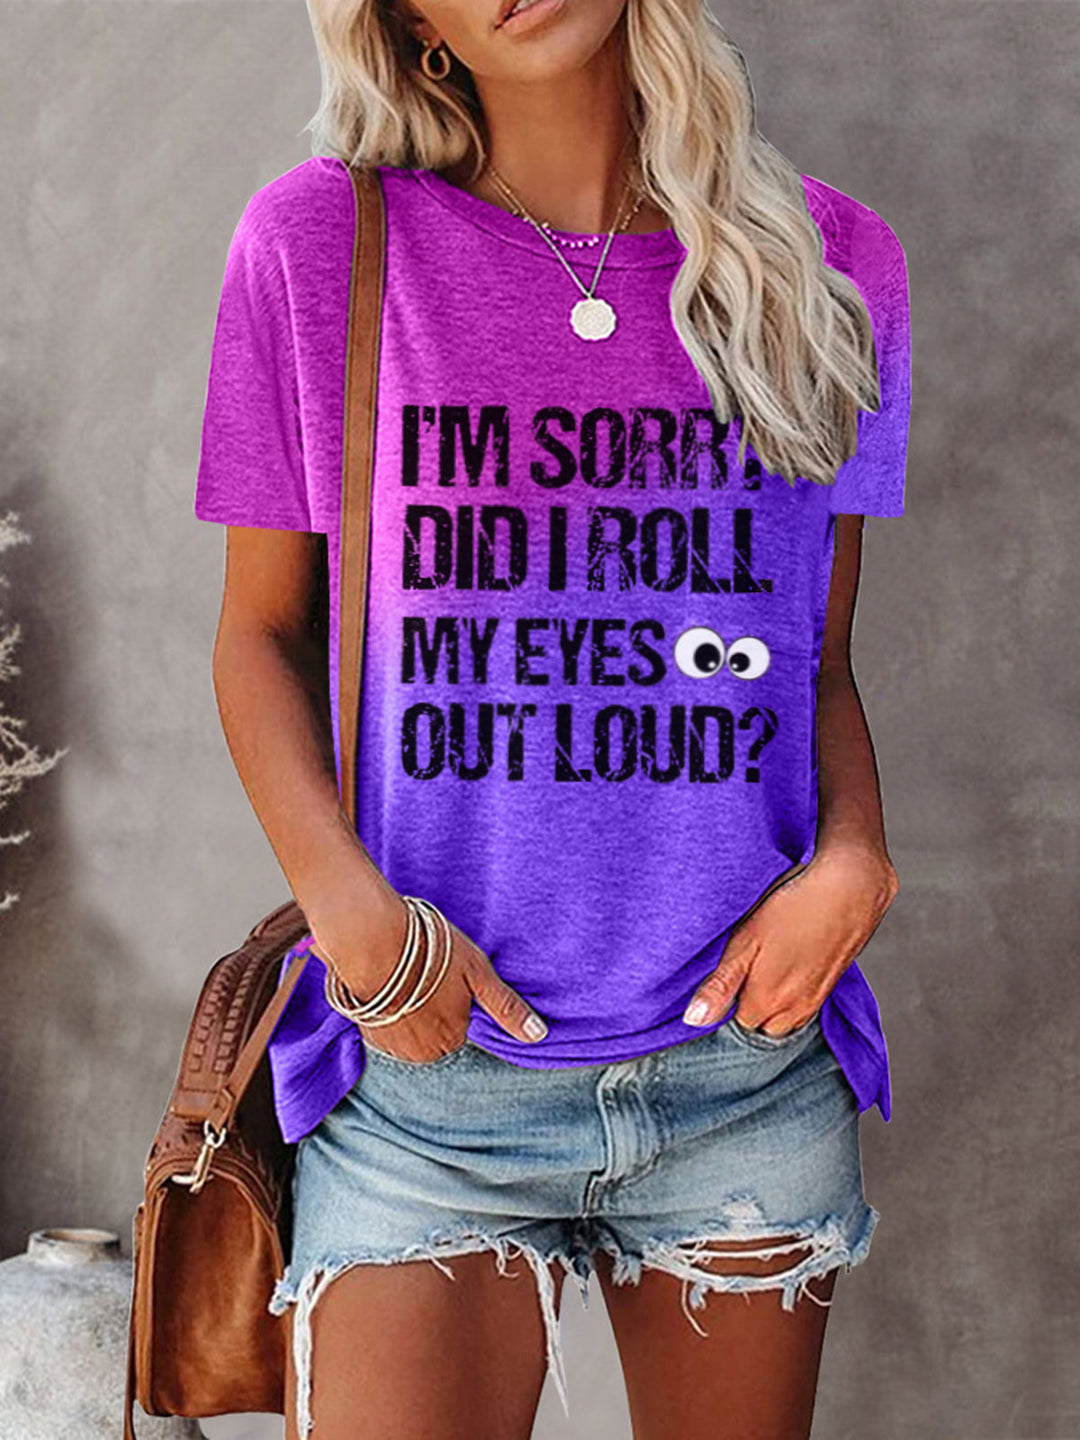 Women's I'm Sorry Did I Roll My Eyes Out Loud Funny Saying Tie-Dye Tee